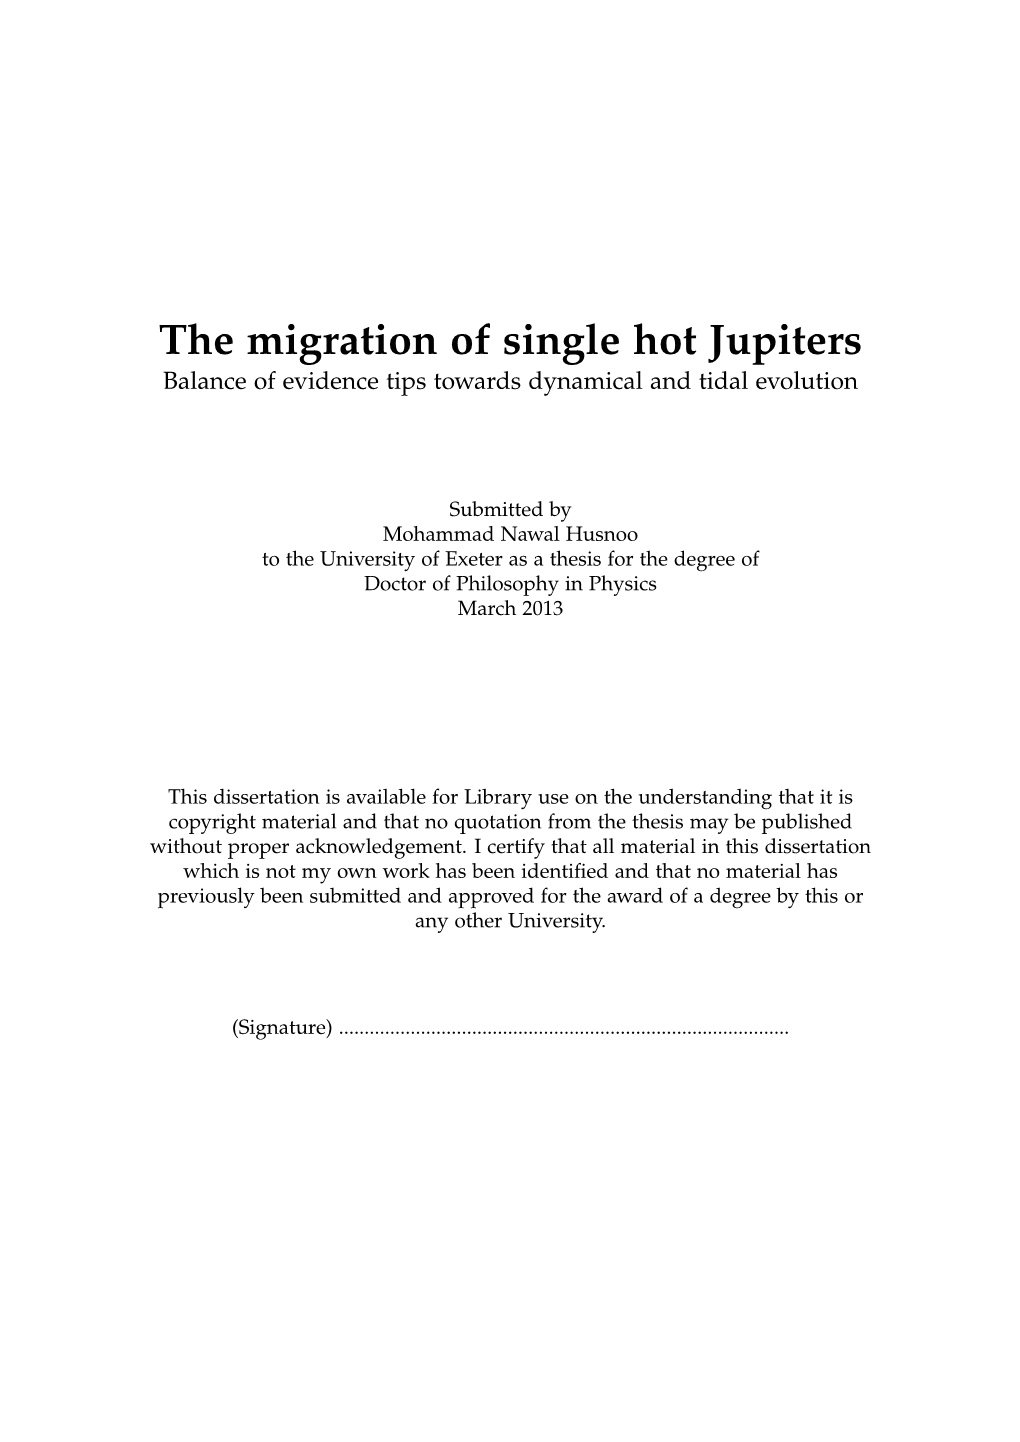 The Migration of Single Hot Jupiters Balance of Evidence Tips Towards Dynamical and Tidal Evolution